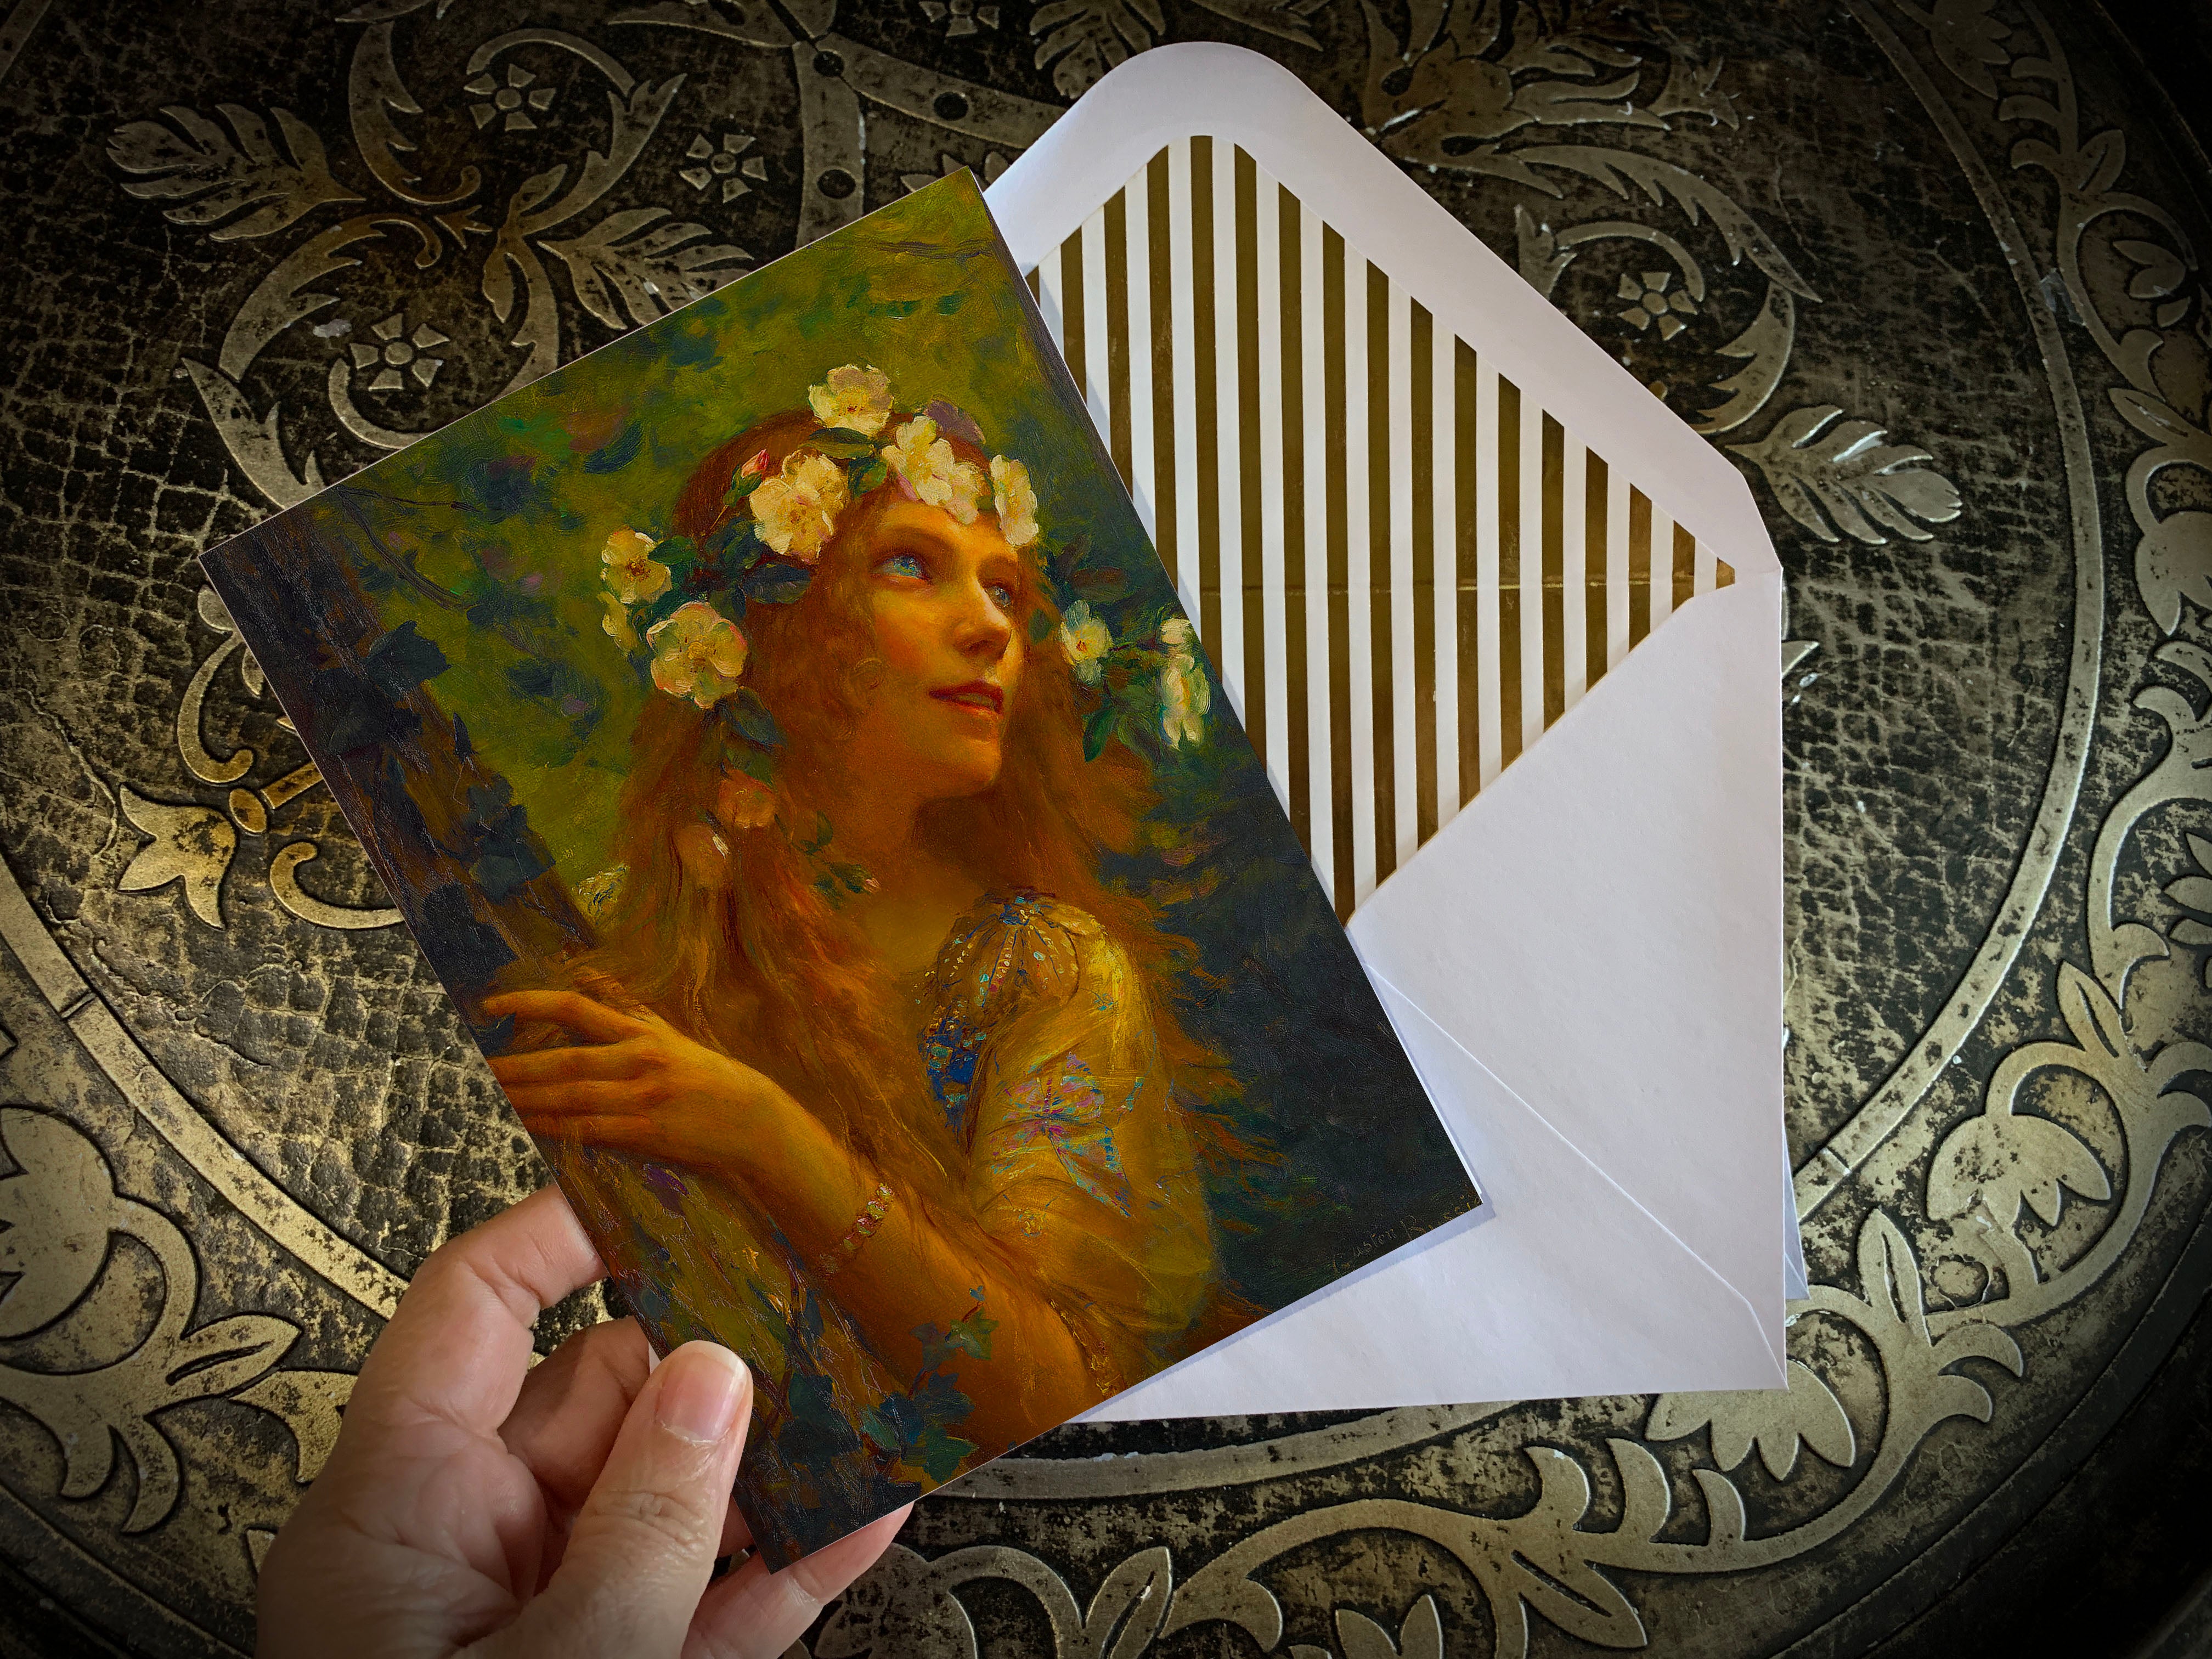 Water Nymphs by Gaston Bussiere, Everyday Greeting Cards with Elegant Striped Gold Foil Envelopes, 5in x 7in, 5 Cards/5 Envelopes